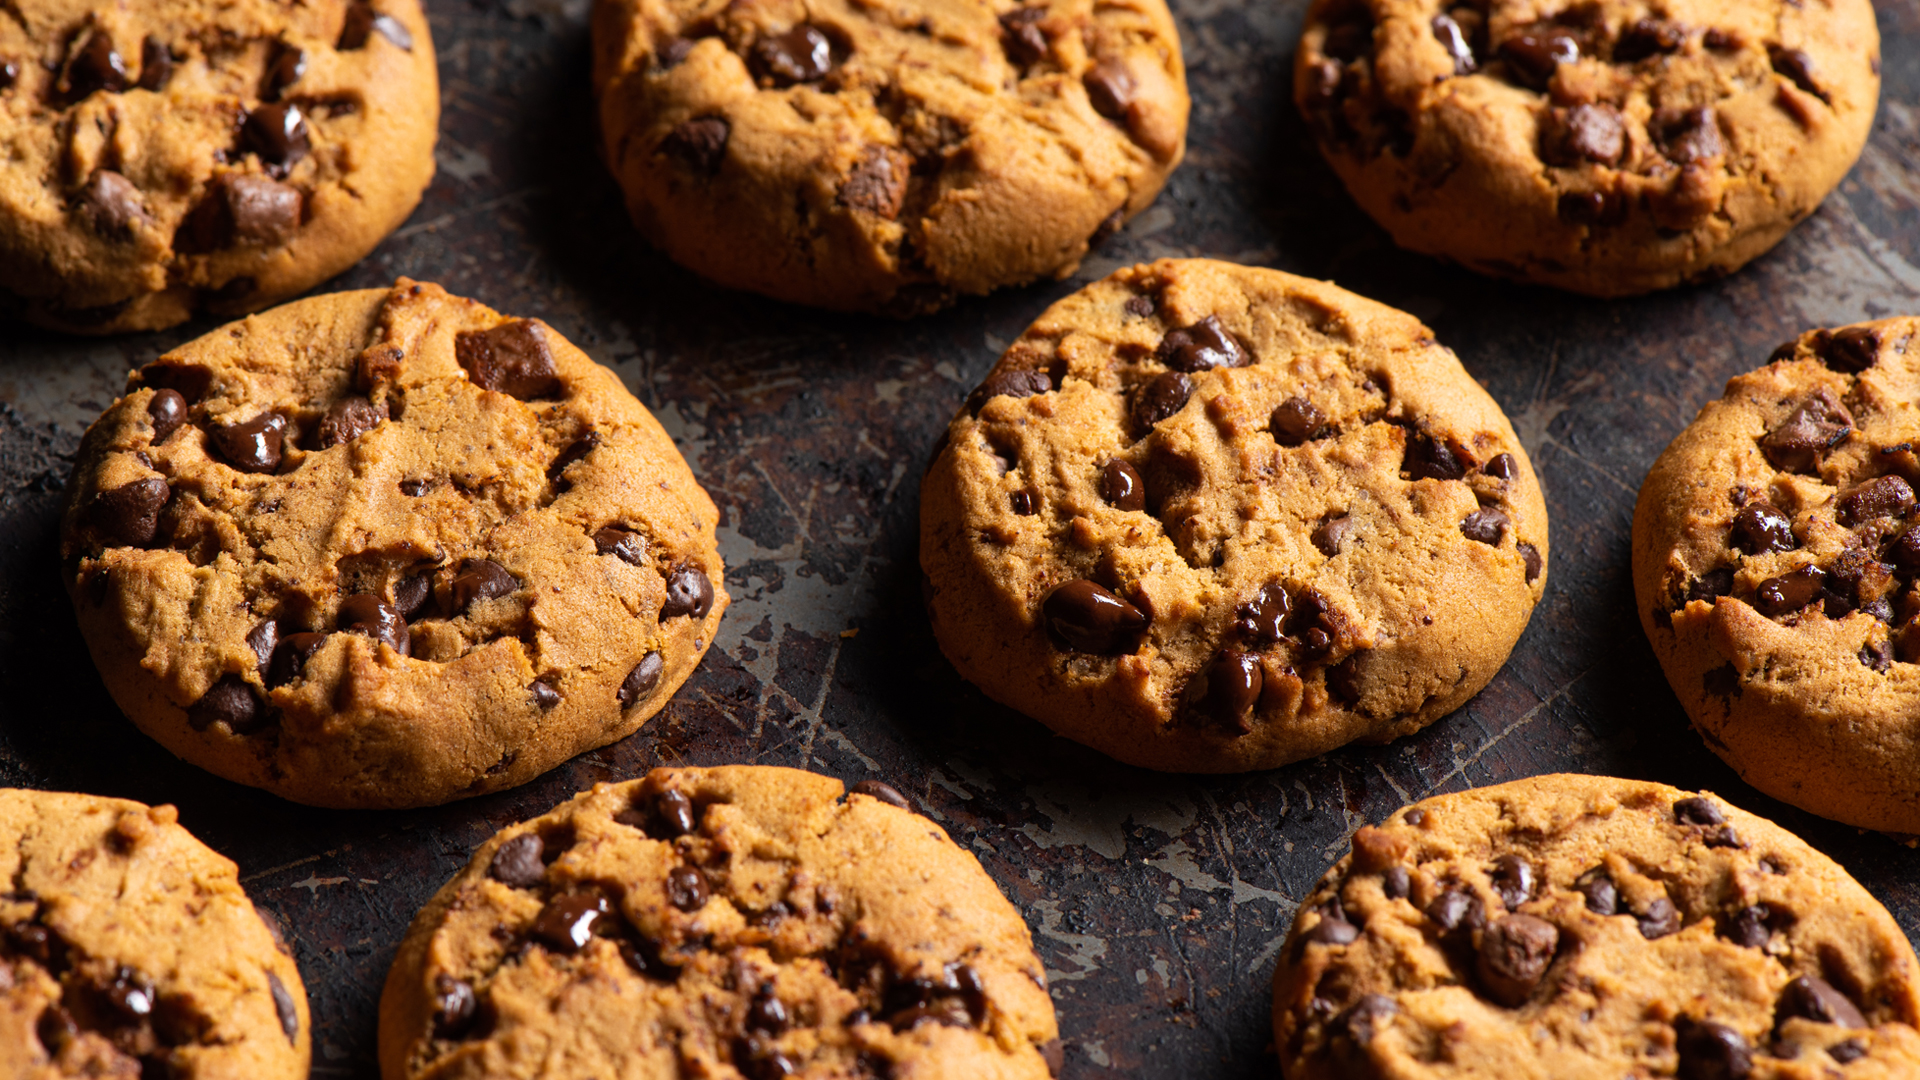 These flourless, gluten-free chocolate chip cookies are addictive.